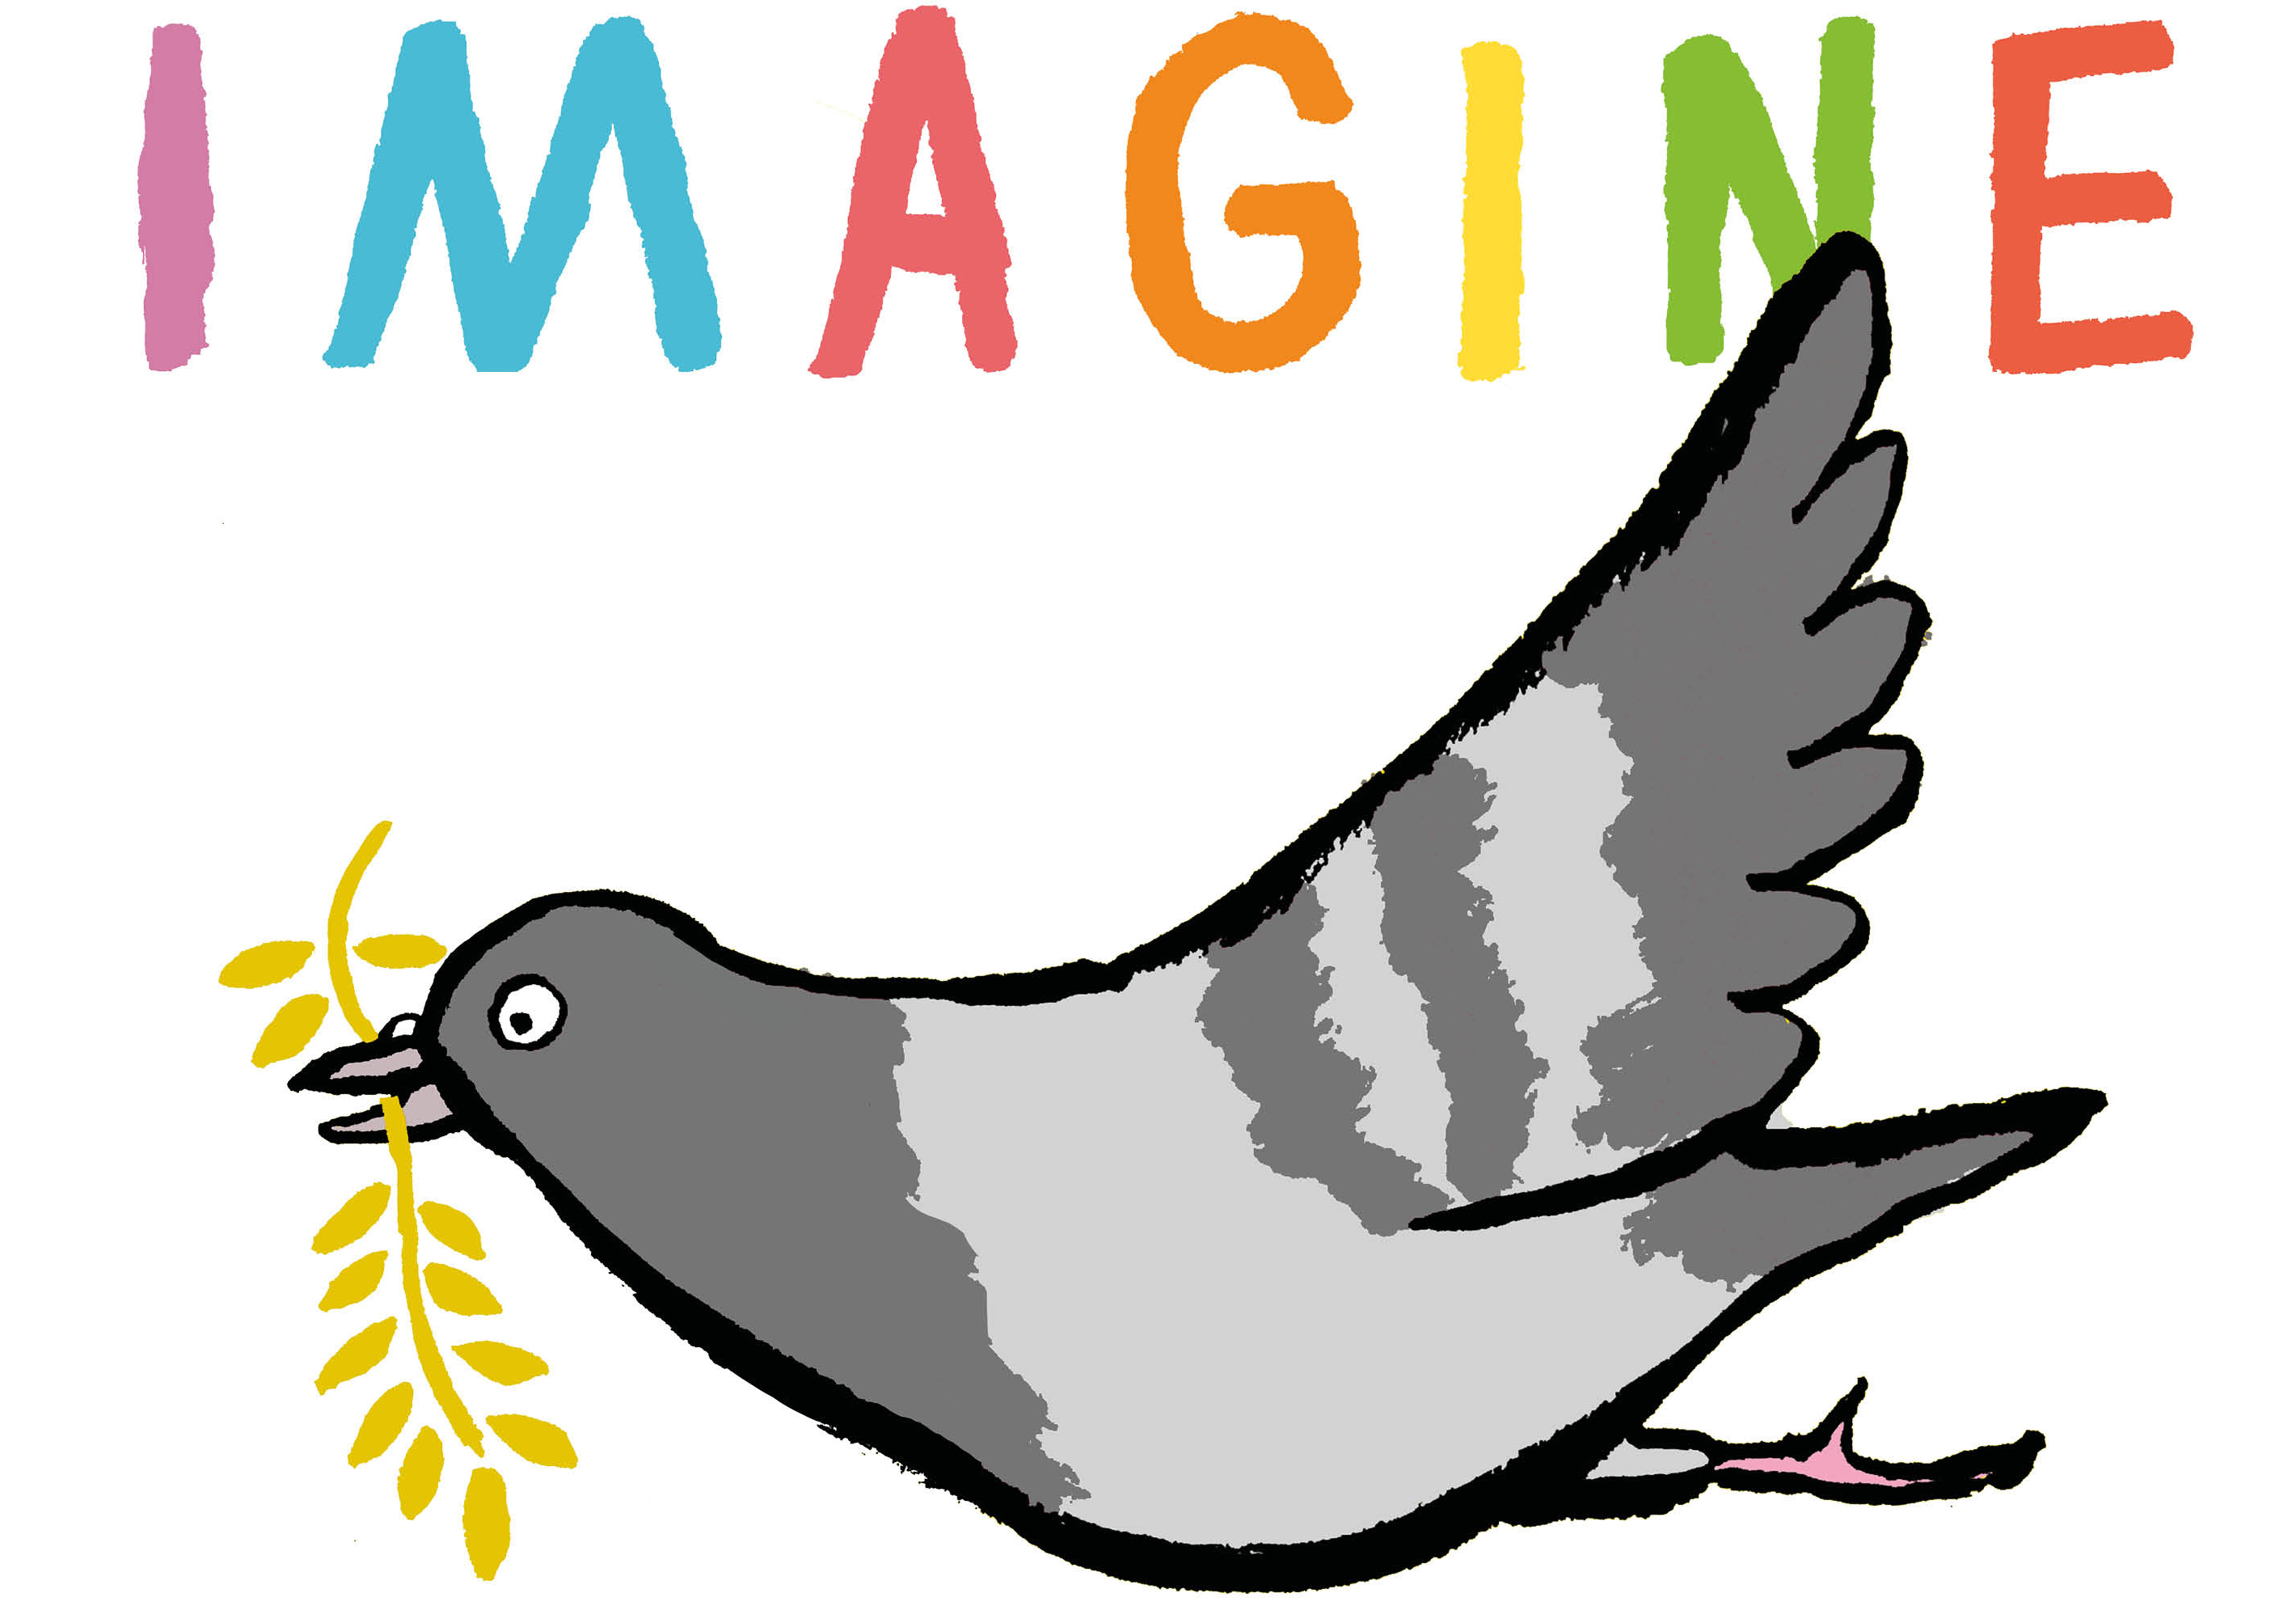 <h2>Houghton Mifflin Harcourt to Publish Picture Book of John Lennon’s Song of Peace and Tolerance, “Imagine”</h2>